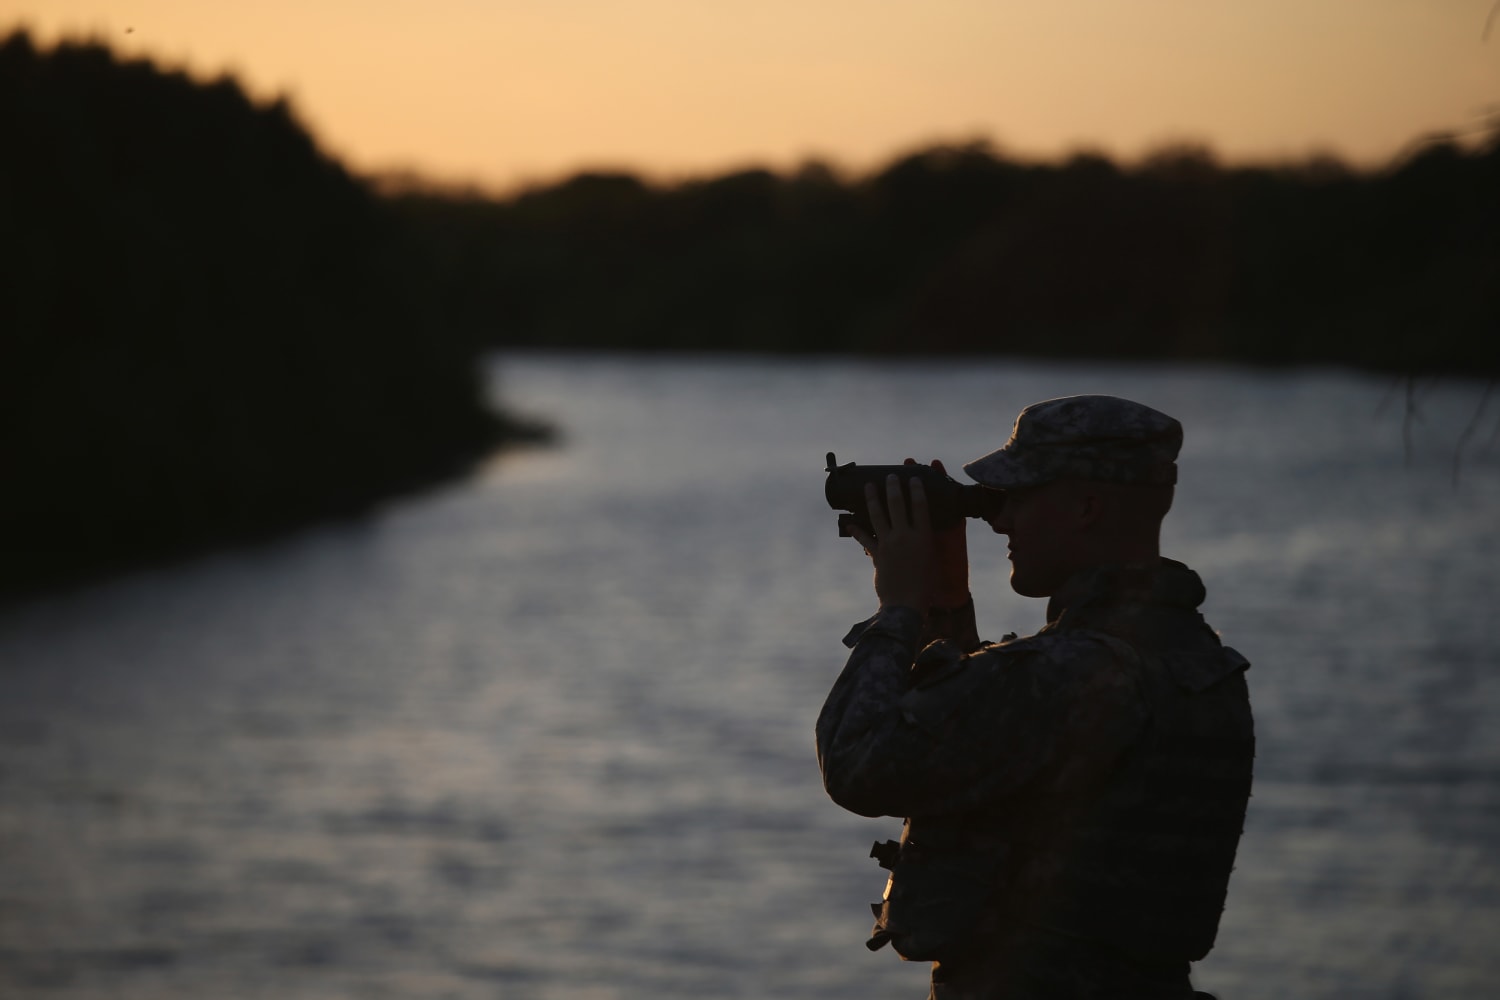 National Guard soldier goes missing in Texas river trying to rescue migrant